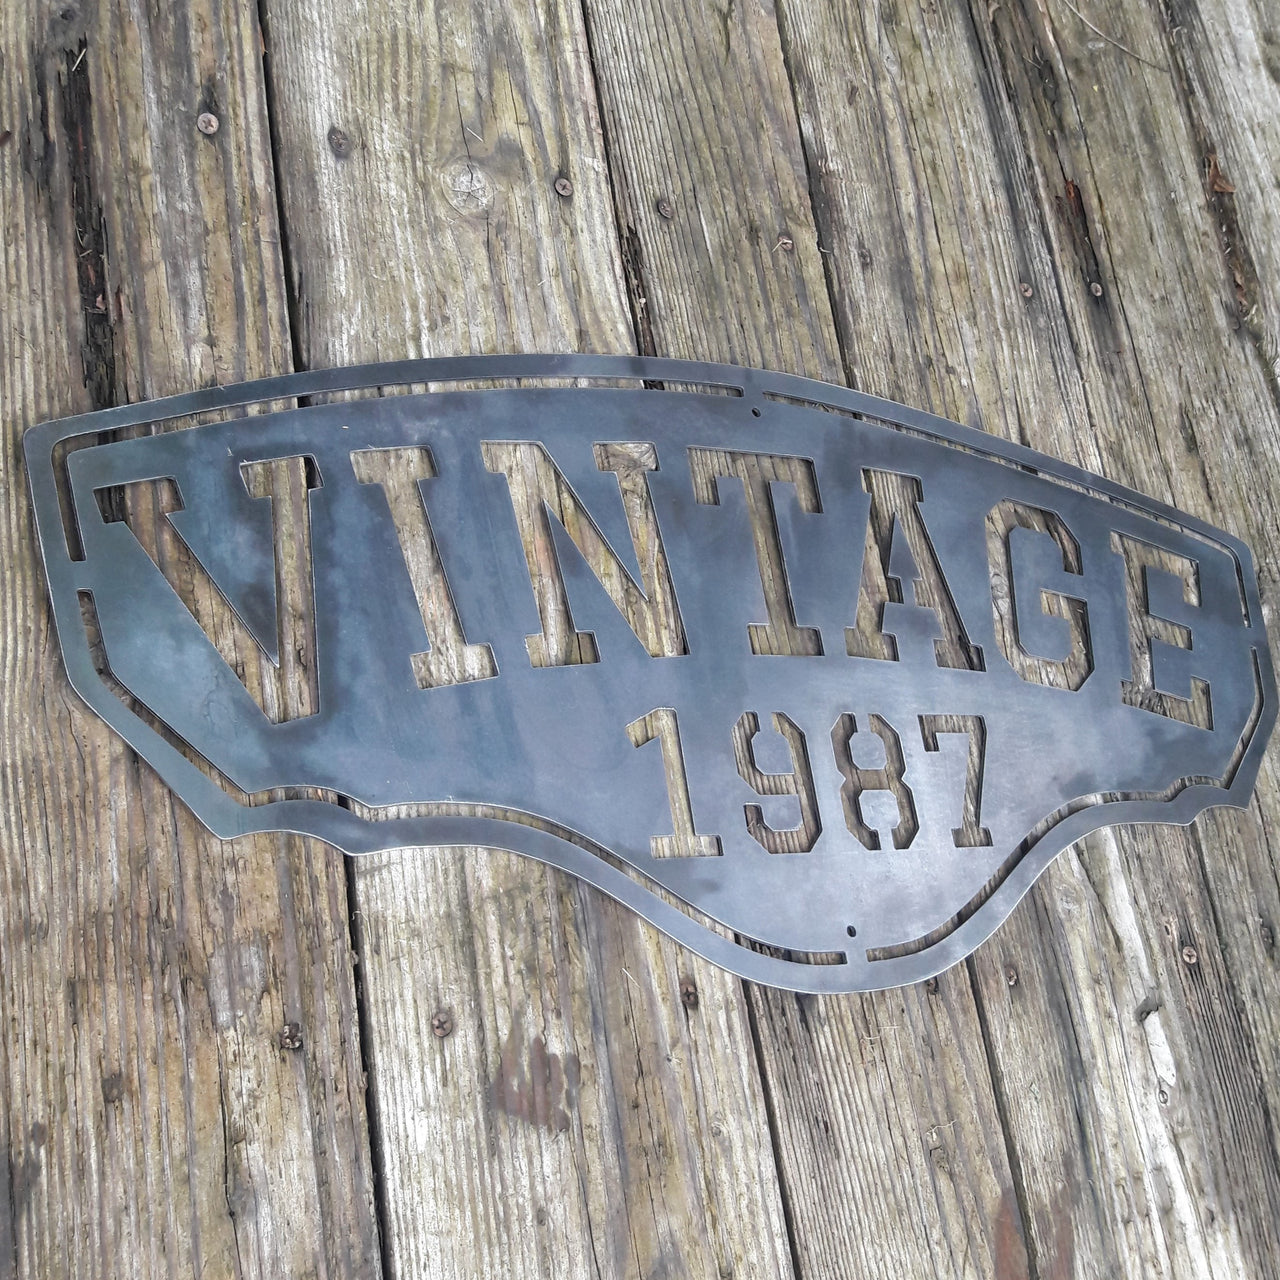 This personalized metal sign reads, "VINTAGE1987".